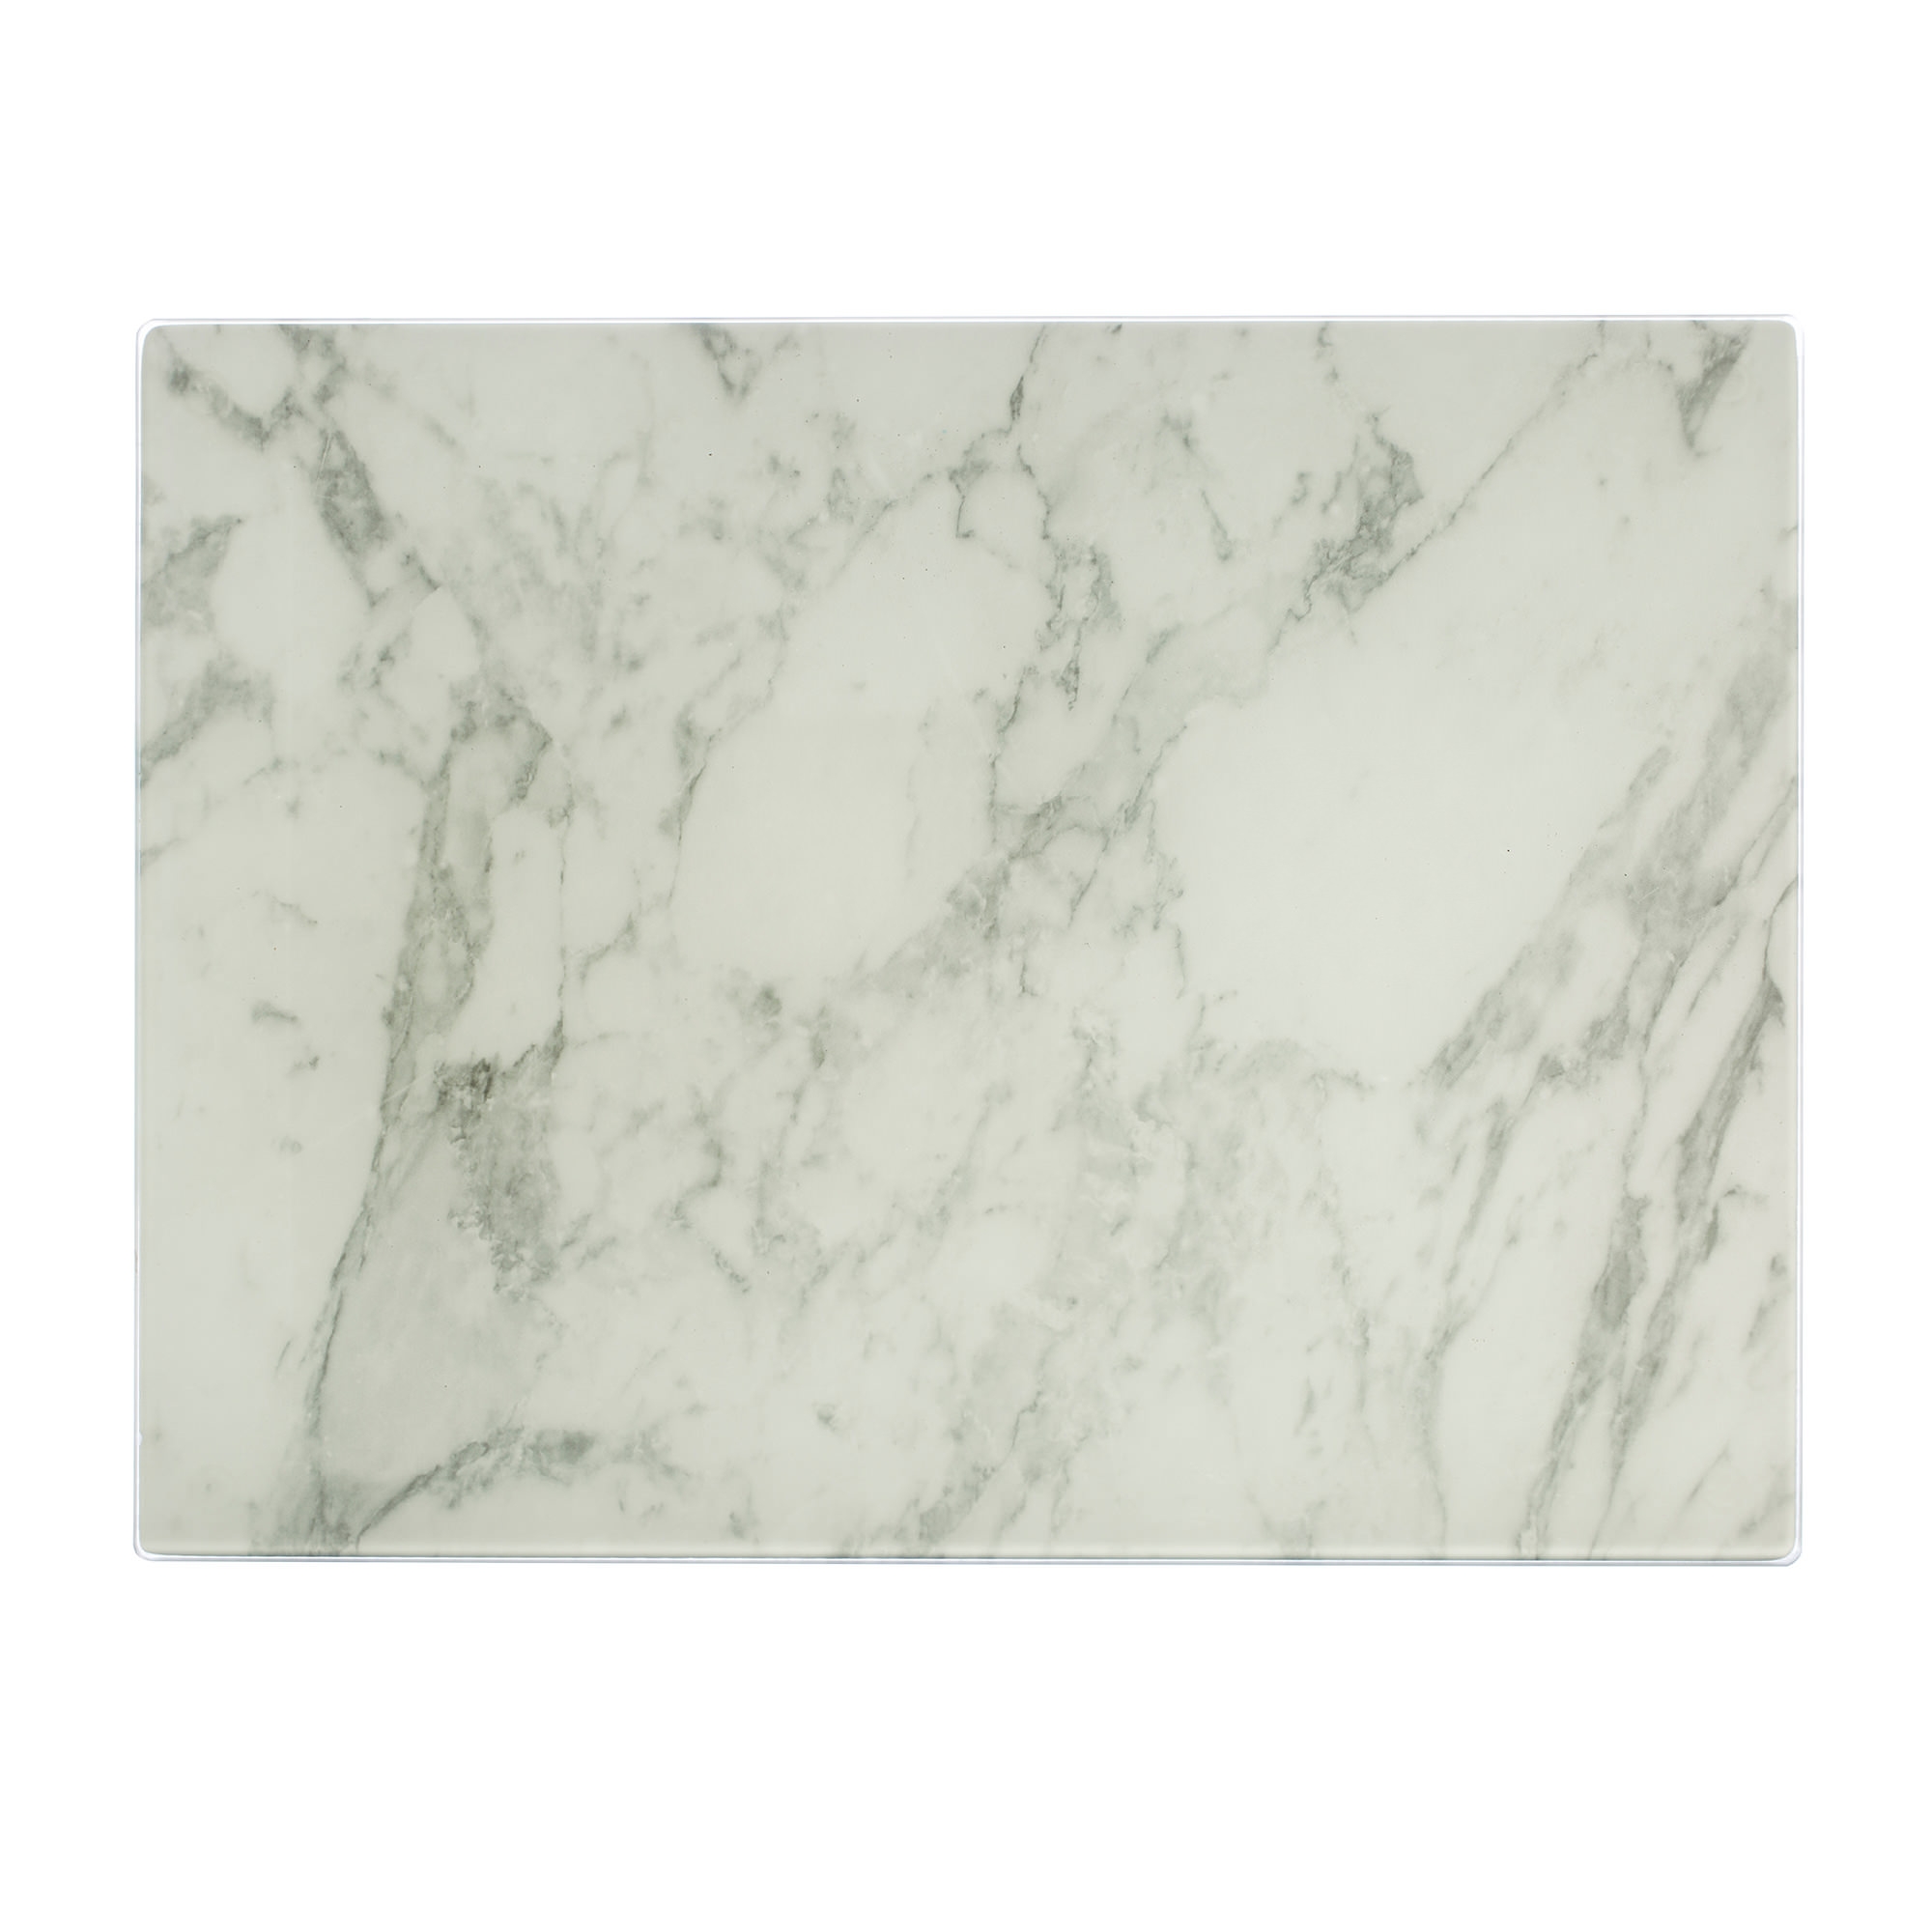 Typhoon Work Surface Protector 40x30cm Marble Image 1